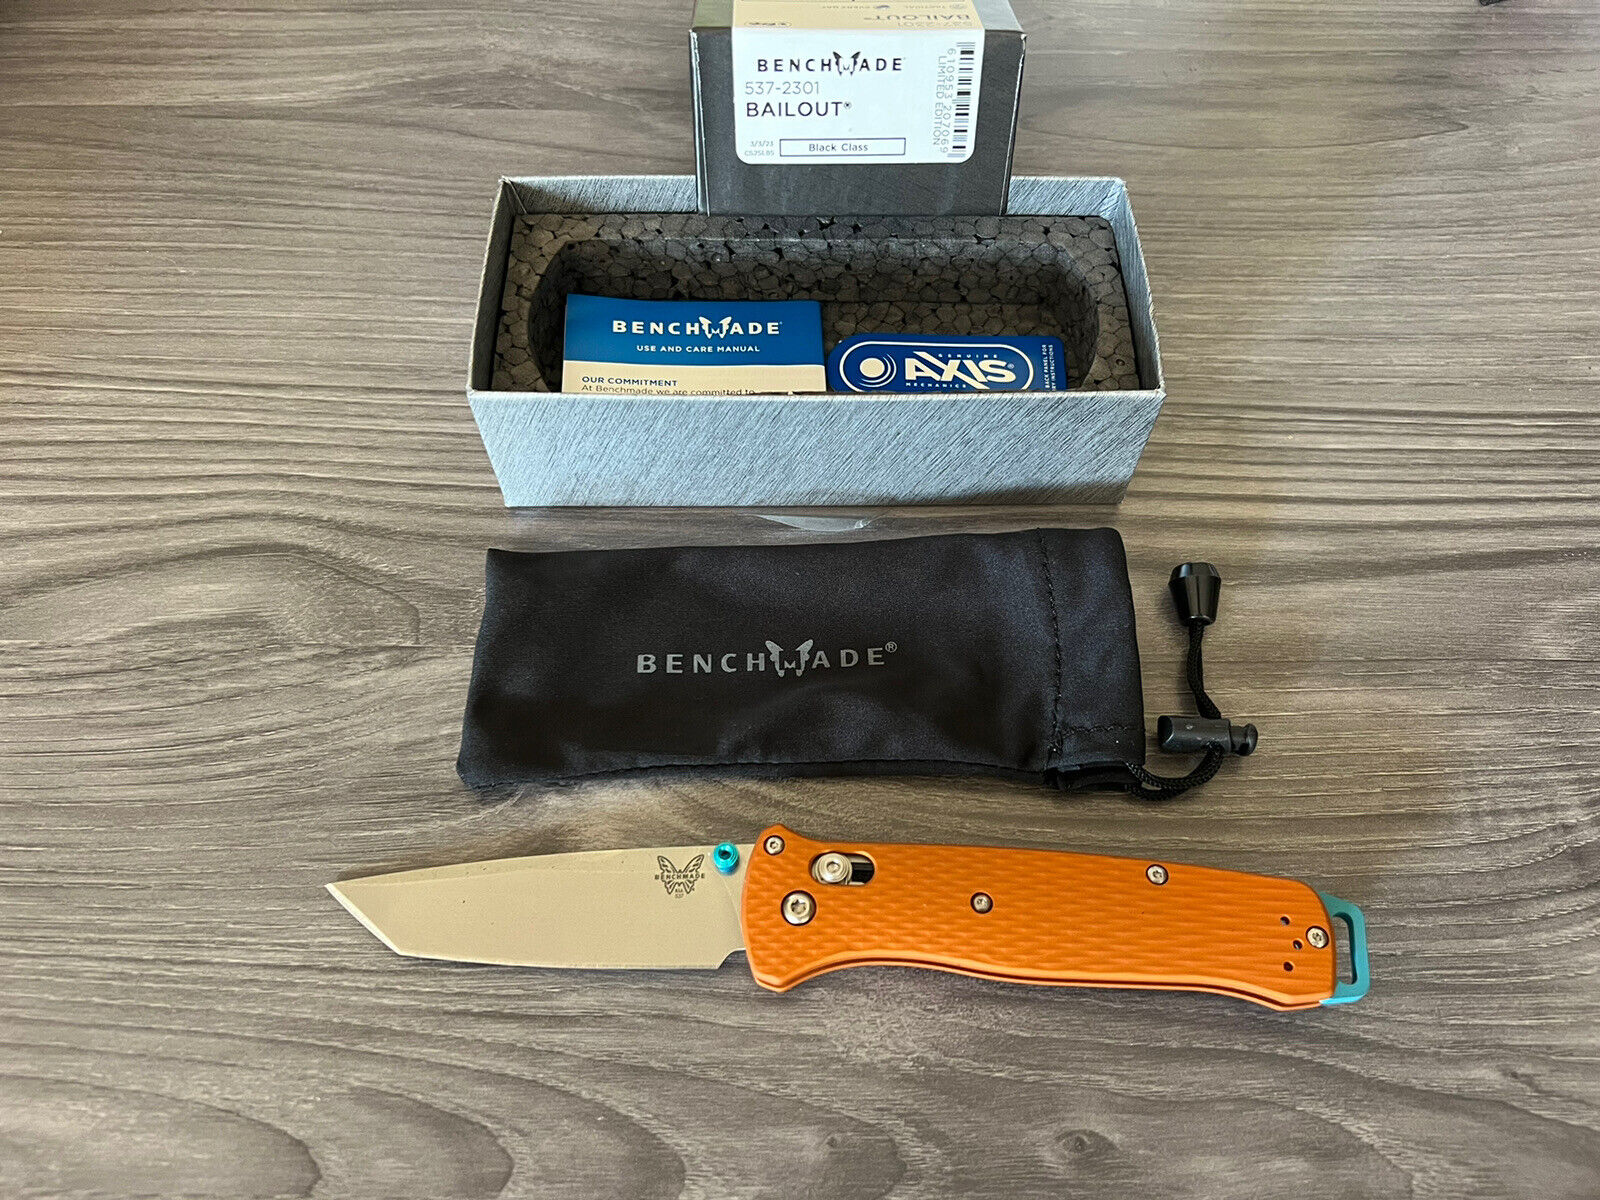 BENCHMADE KNIVES USA SHOT SHOW LIMITED EDITION ORANGE BAILOUT KNIFE 537-2301